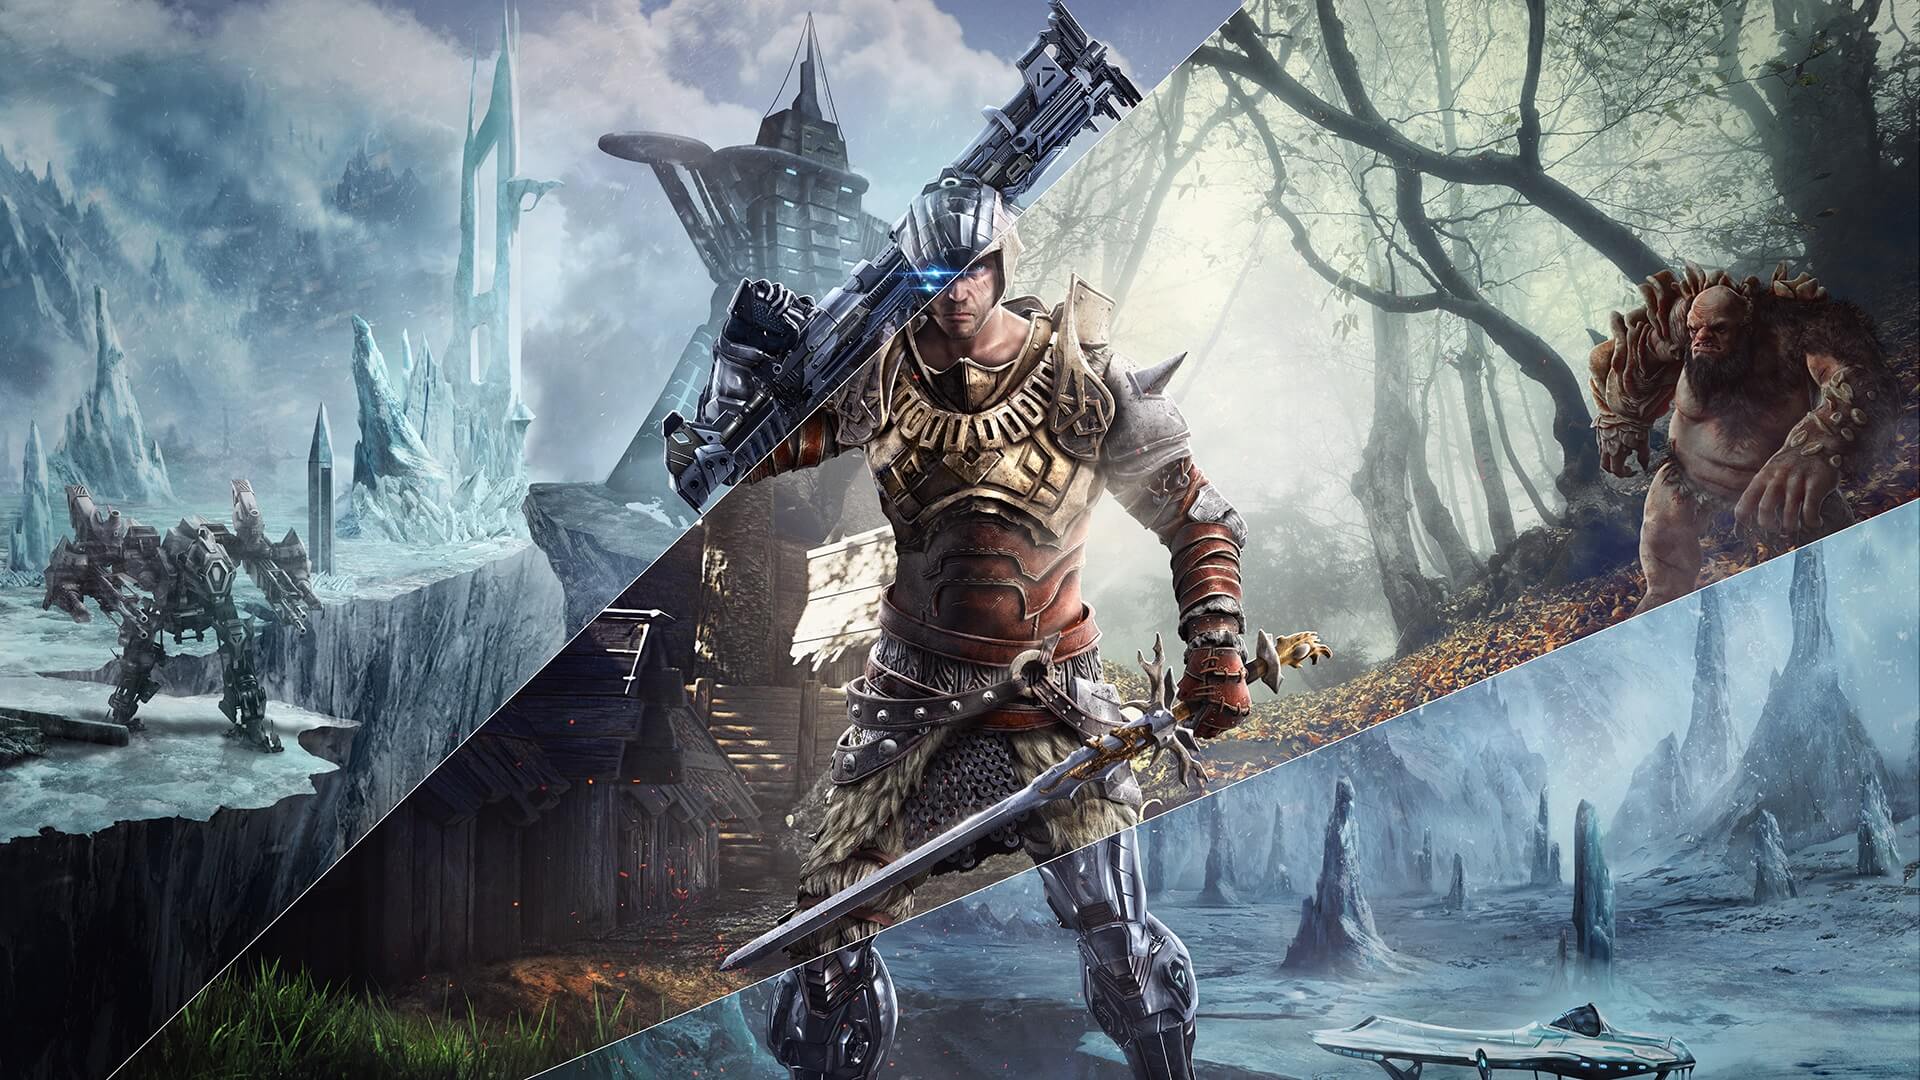 Elex Review – It’s Gothic, Only Now With Laser Rifles